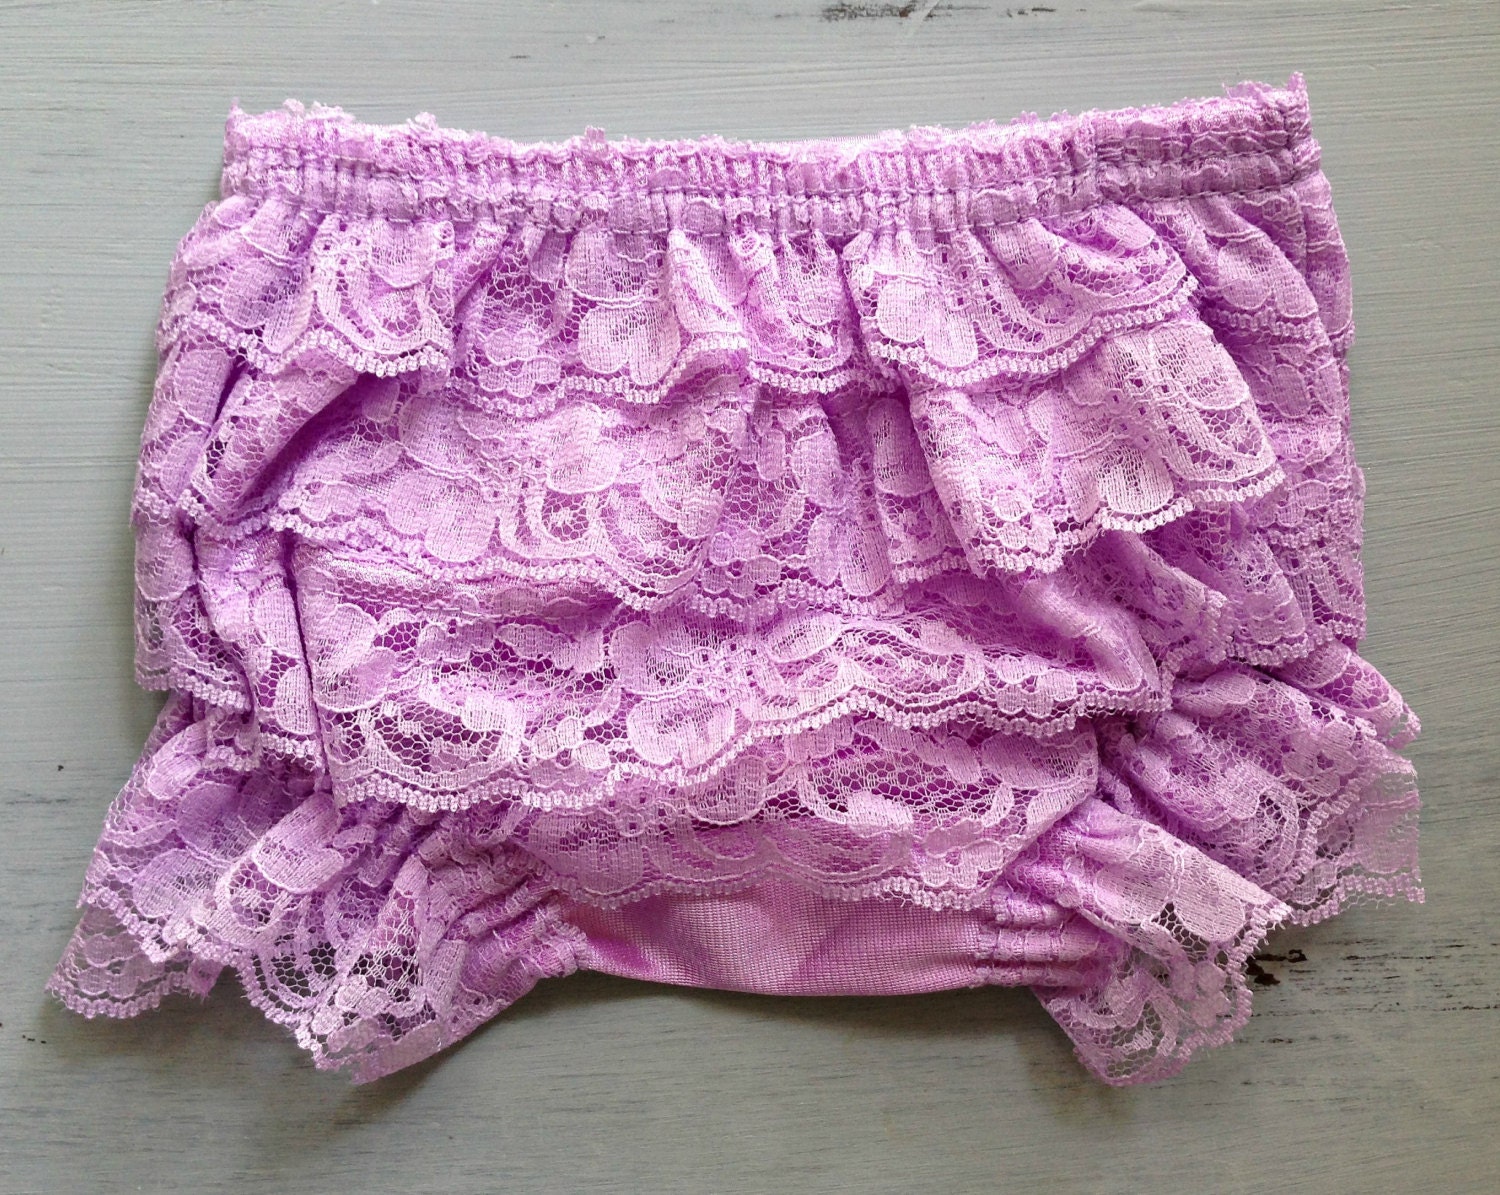 Lavender Vintage Lace Ruffle Baby Bloomers by FrillsAndFrosting